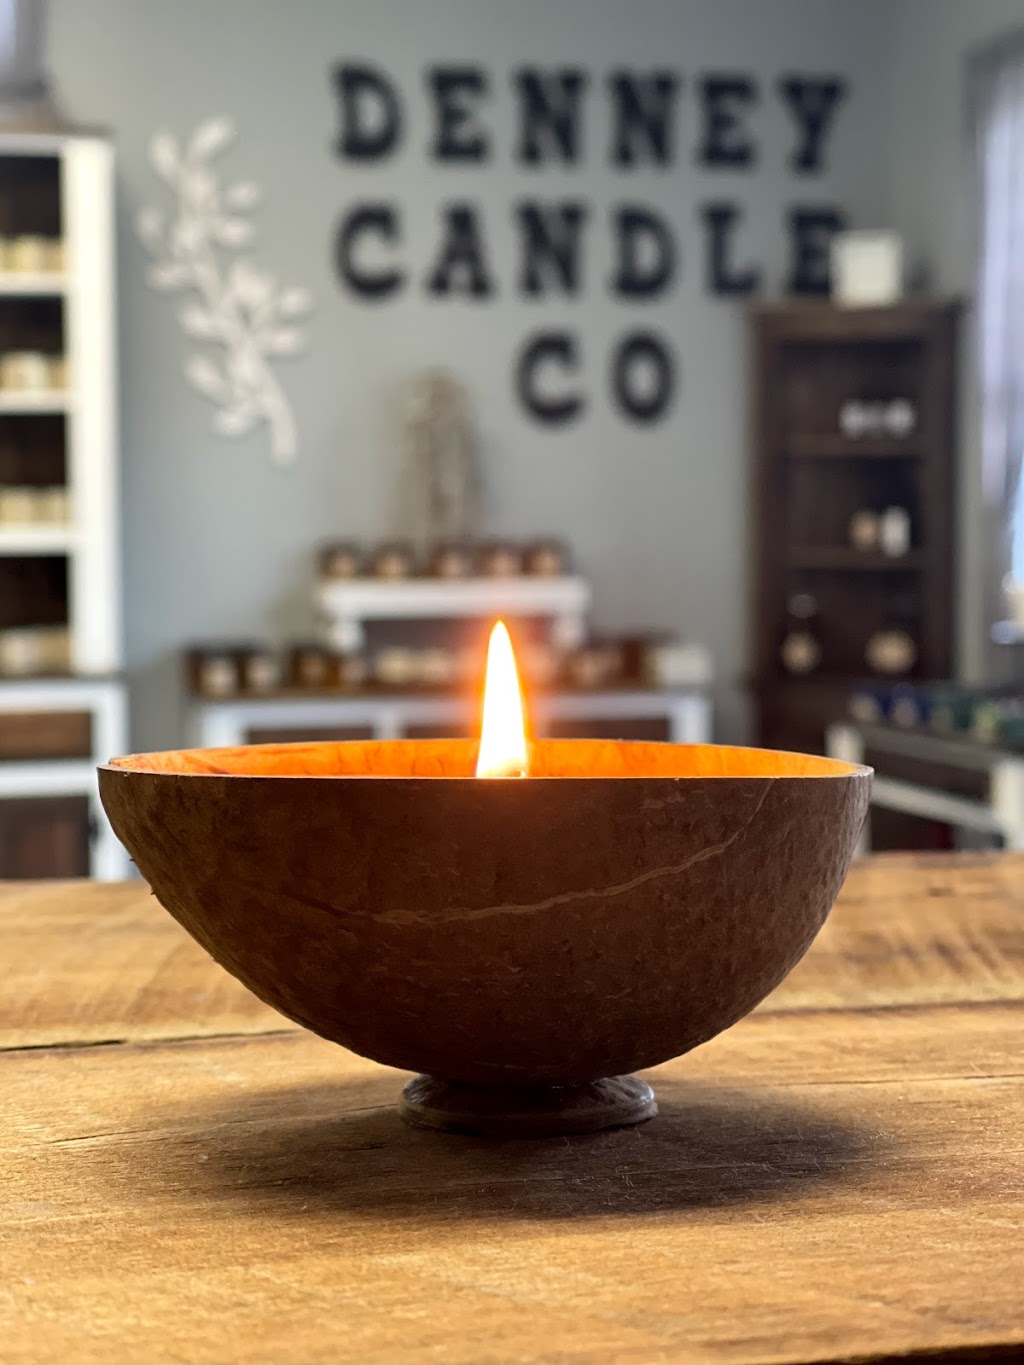 Denney Candle Company LLC | 253 S Mt Vernon Ave, Uniontown, PA 15401, USA | Phone: (724) 323-3000